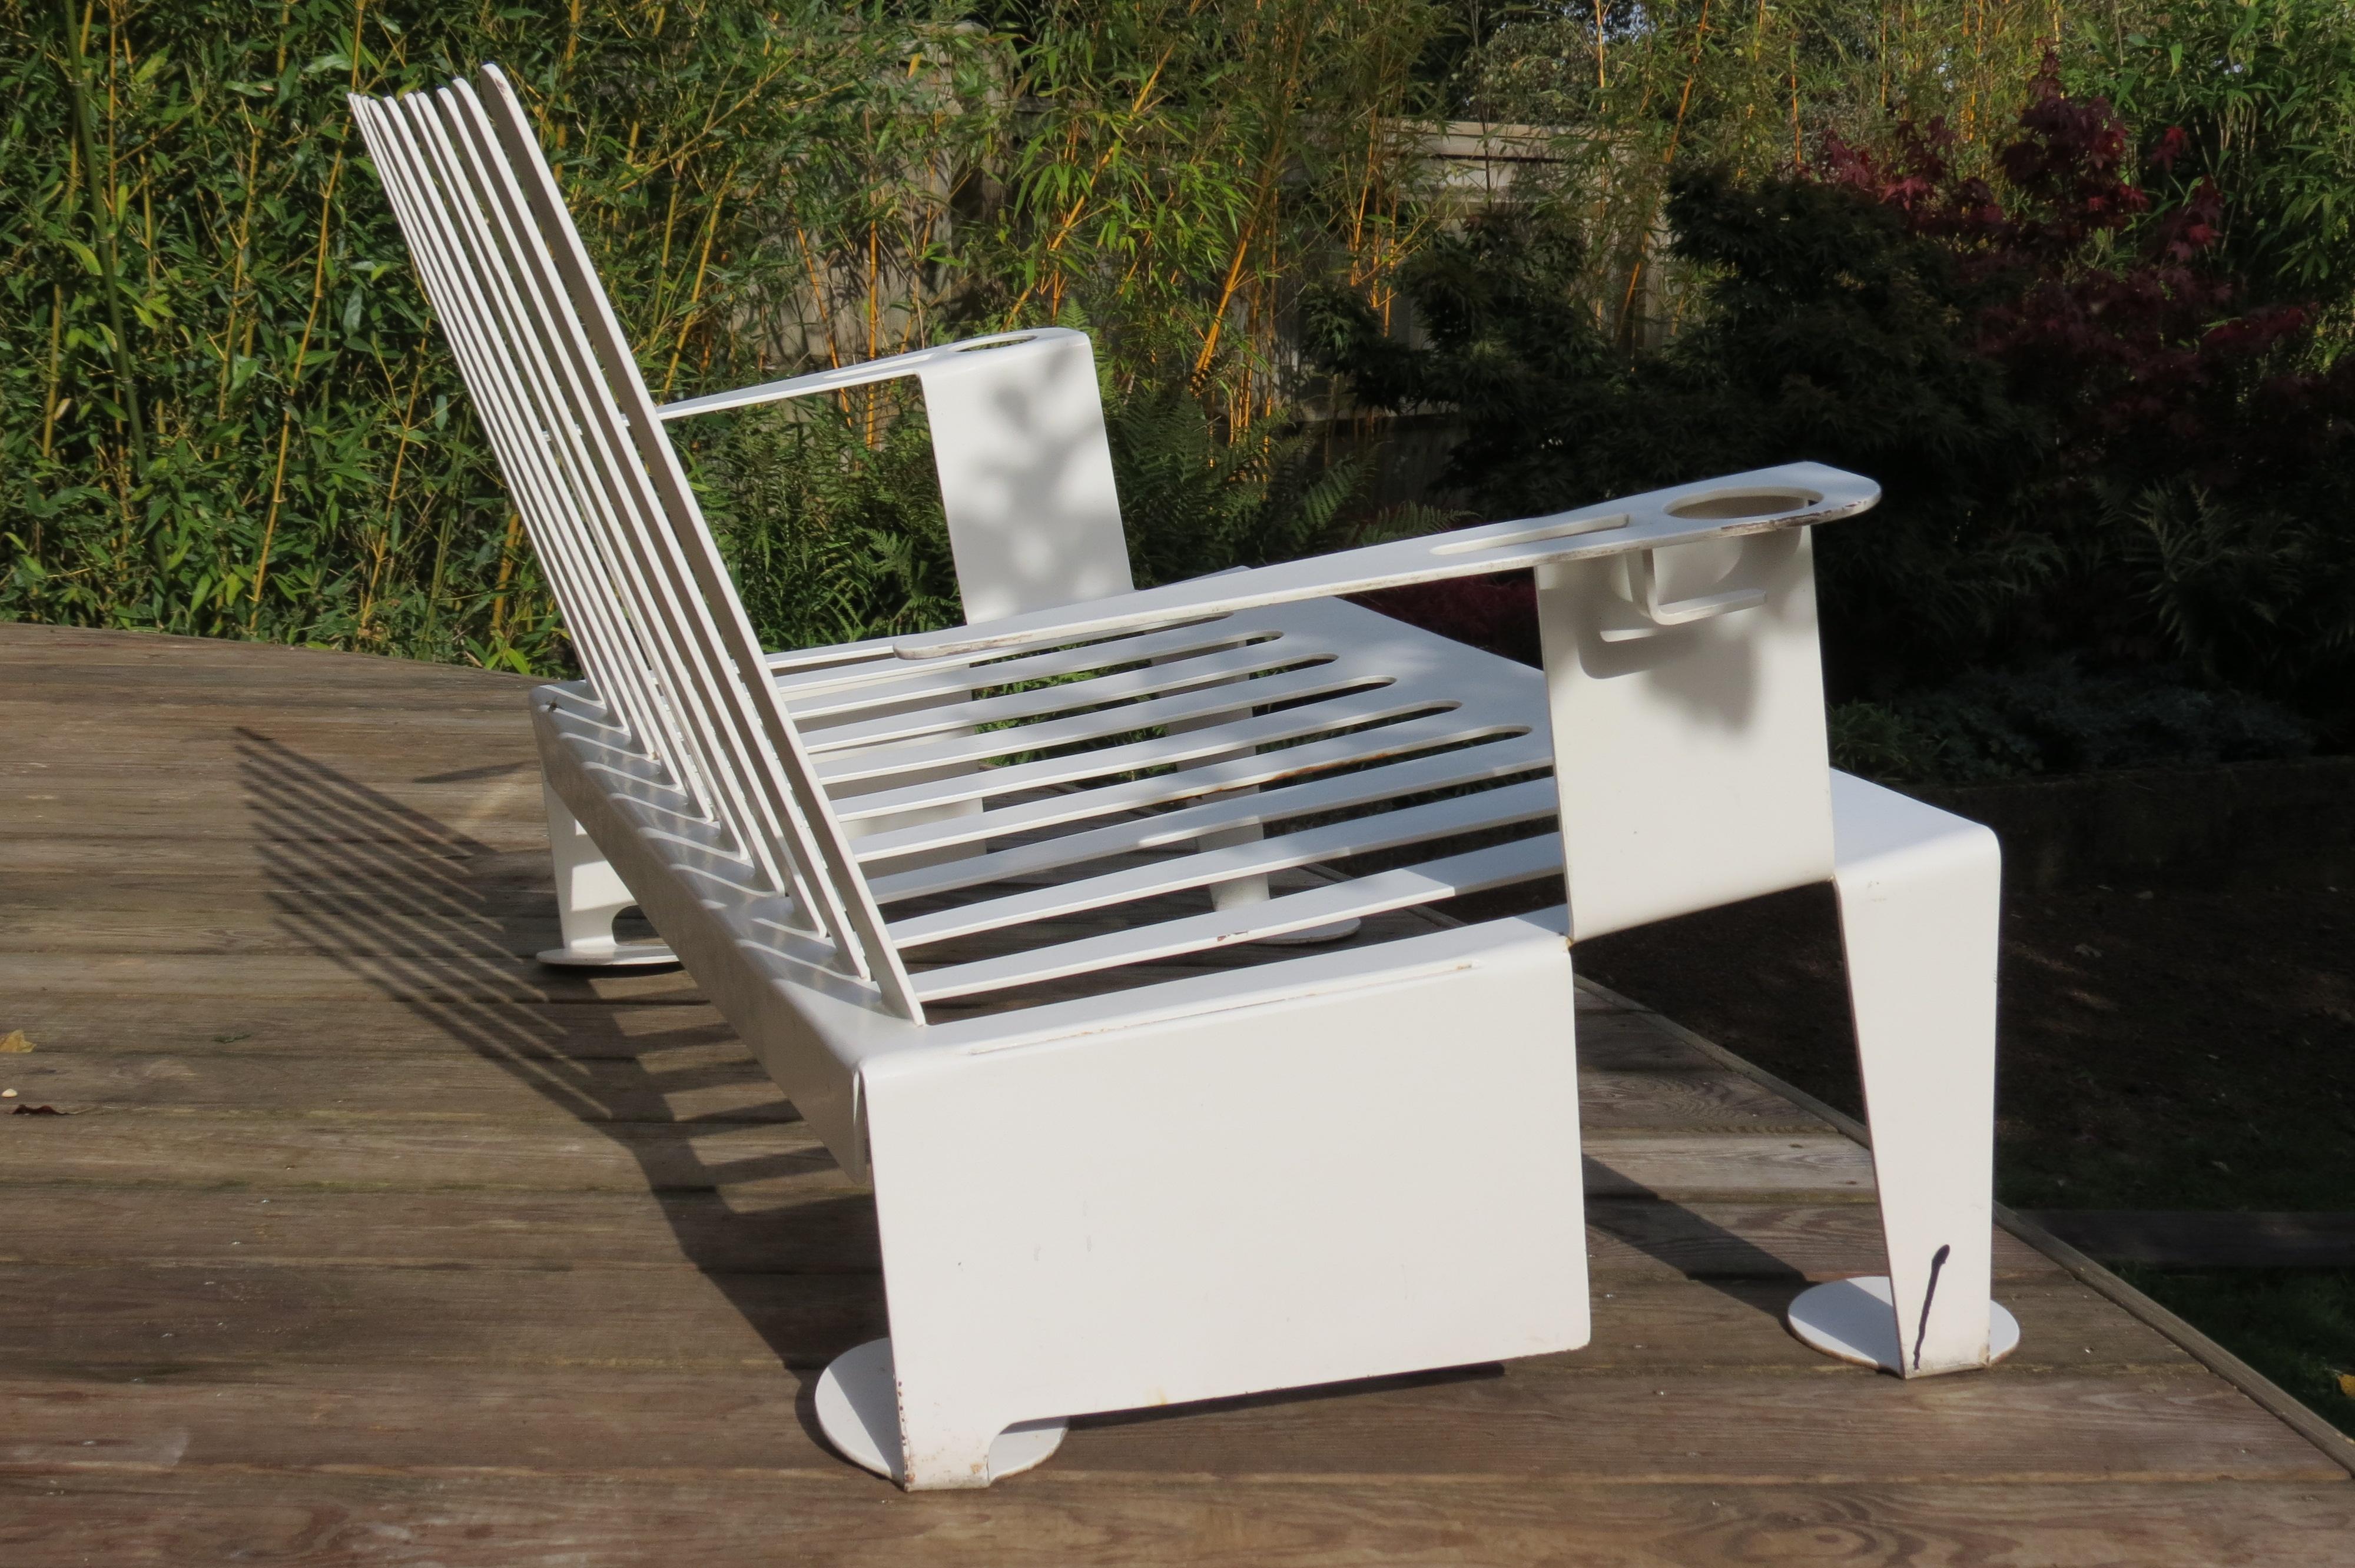 White metal moden design bench, 1990s
A very good quality metal bench from the 1990s, good quality thick steel. Very cleverly cut and formed from one sheet of metal. Possibly a prototype.
Good over all condition, some wear and minor loss to the